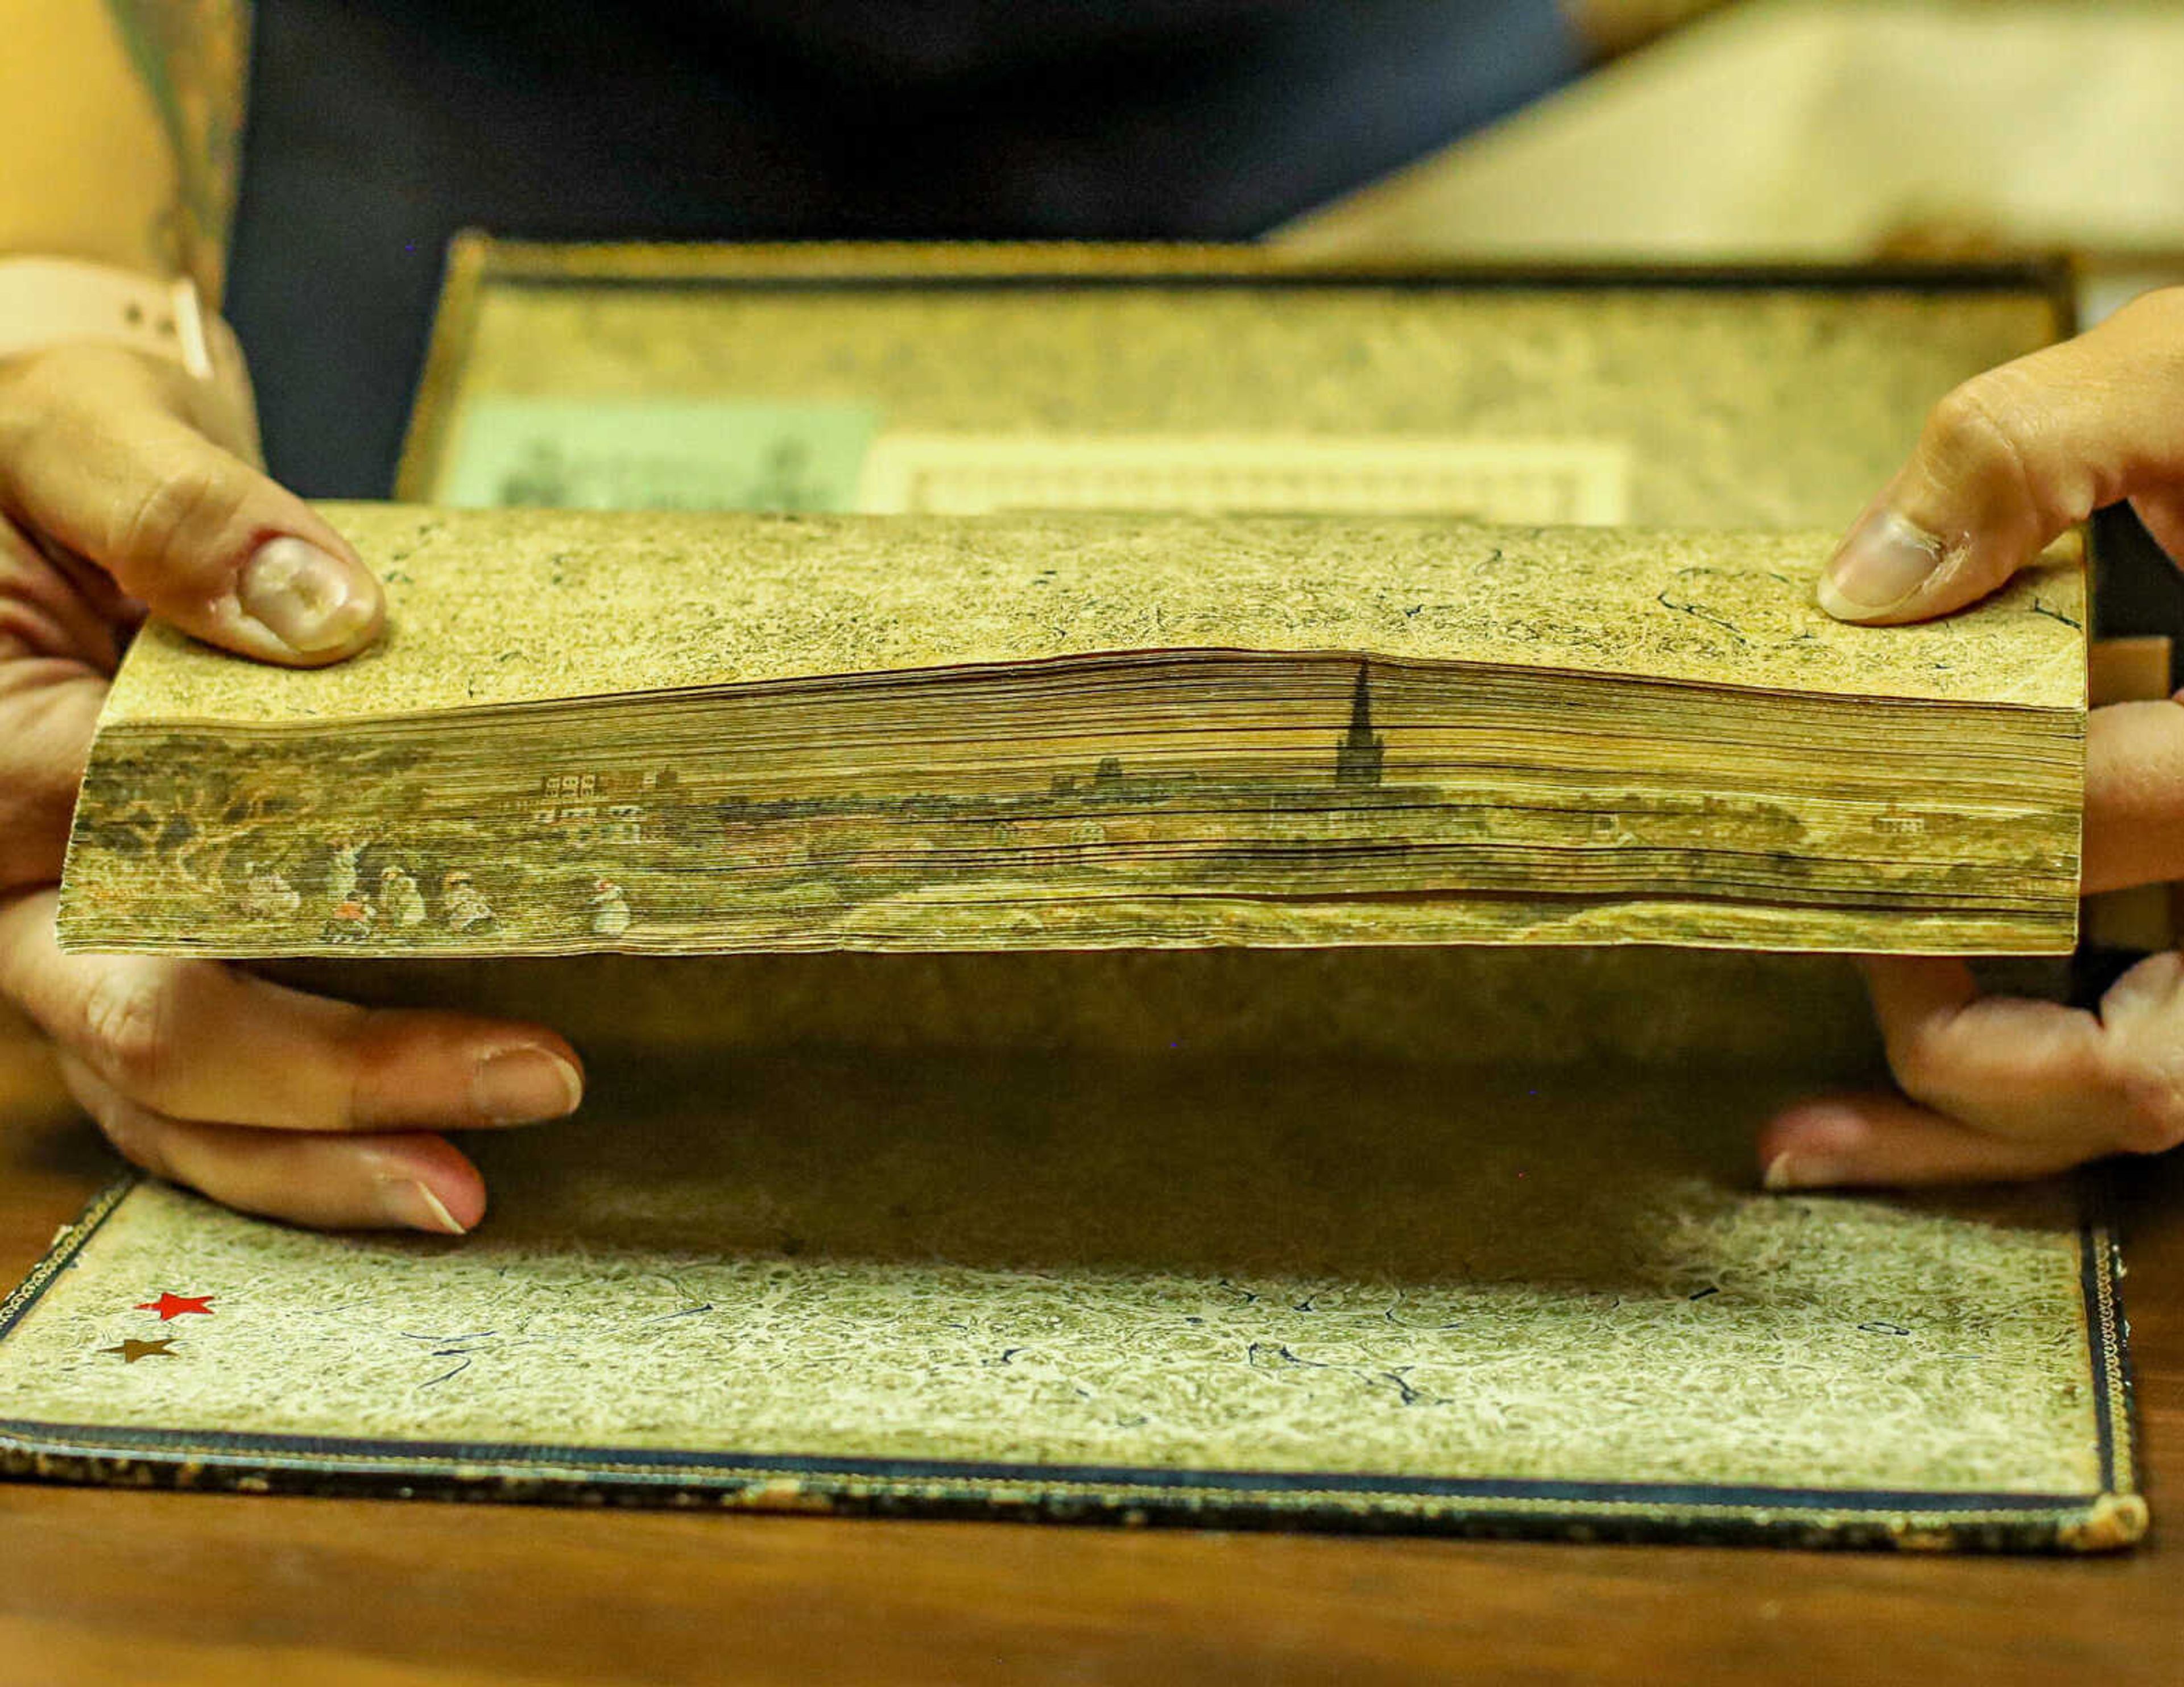 A text is fanned to display fore-edge painting, which is common with older books.